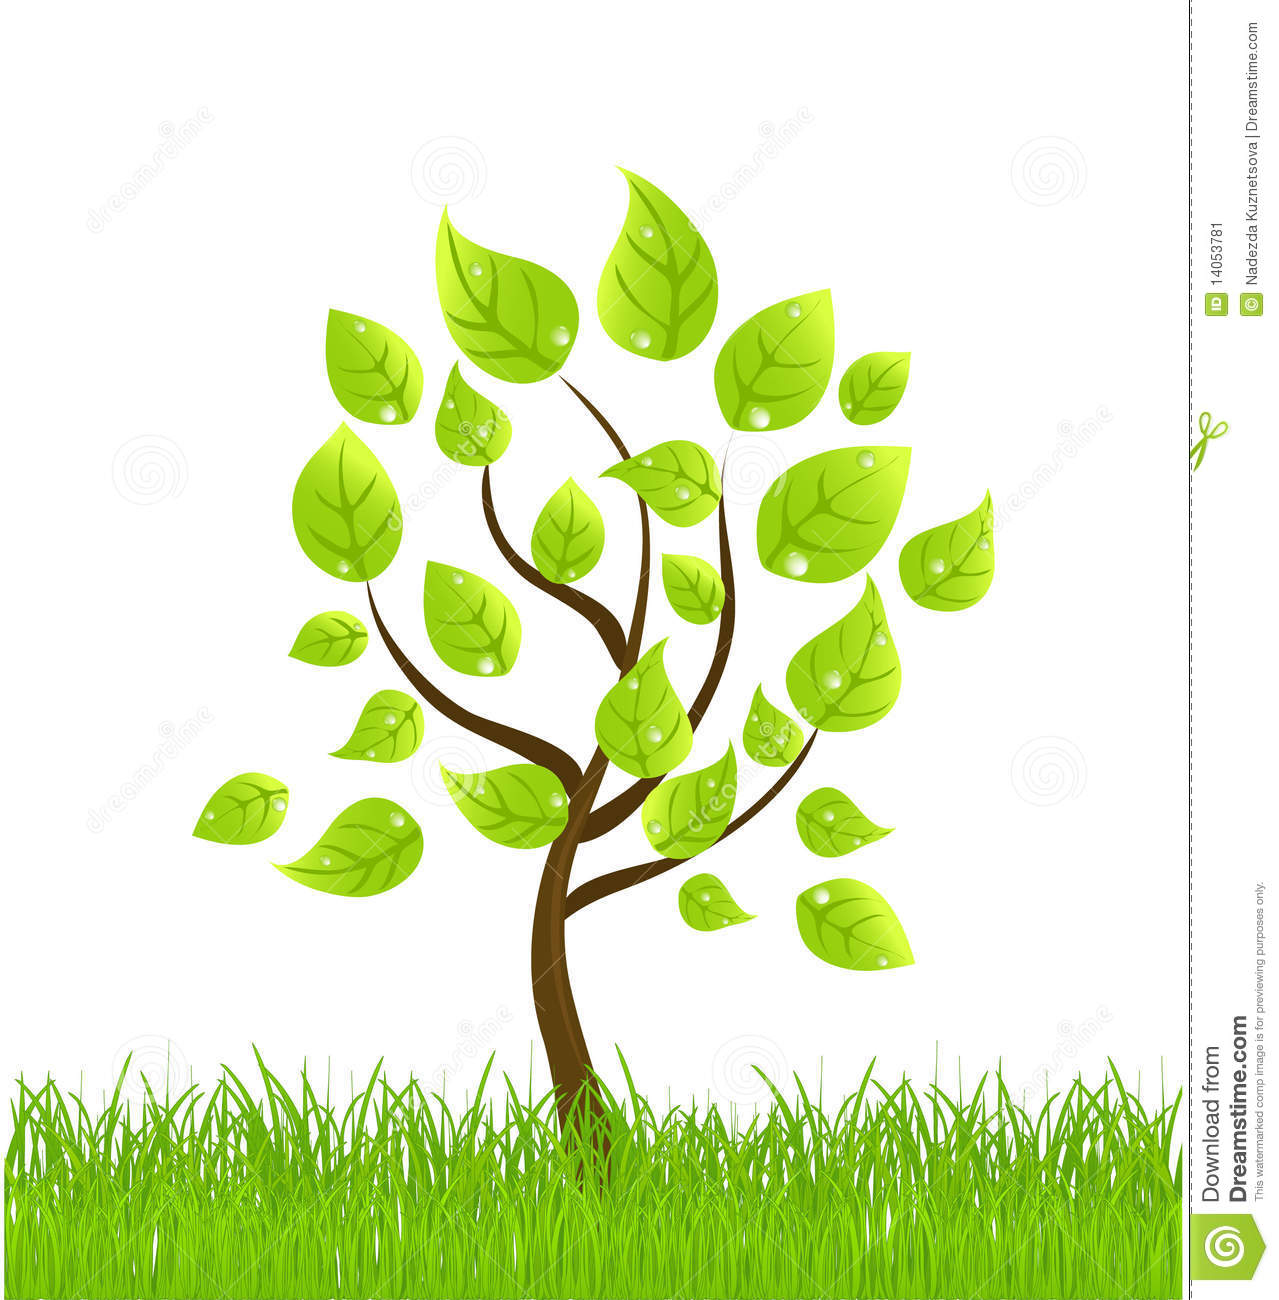 Tree with Grass Vector